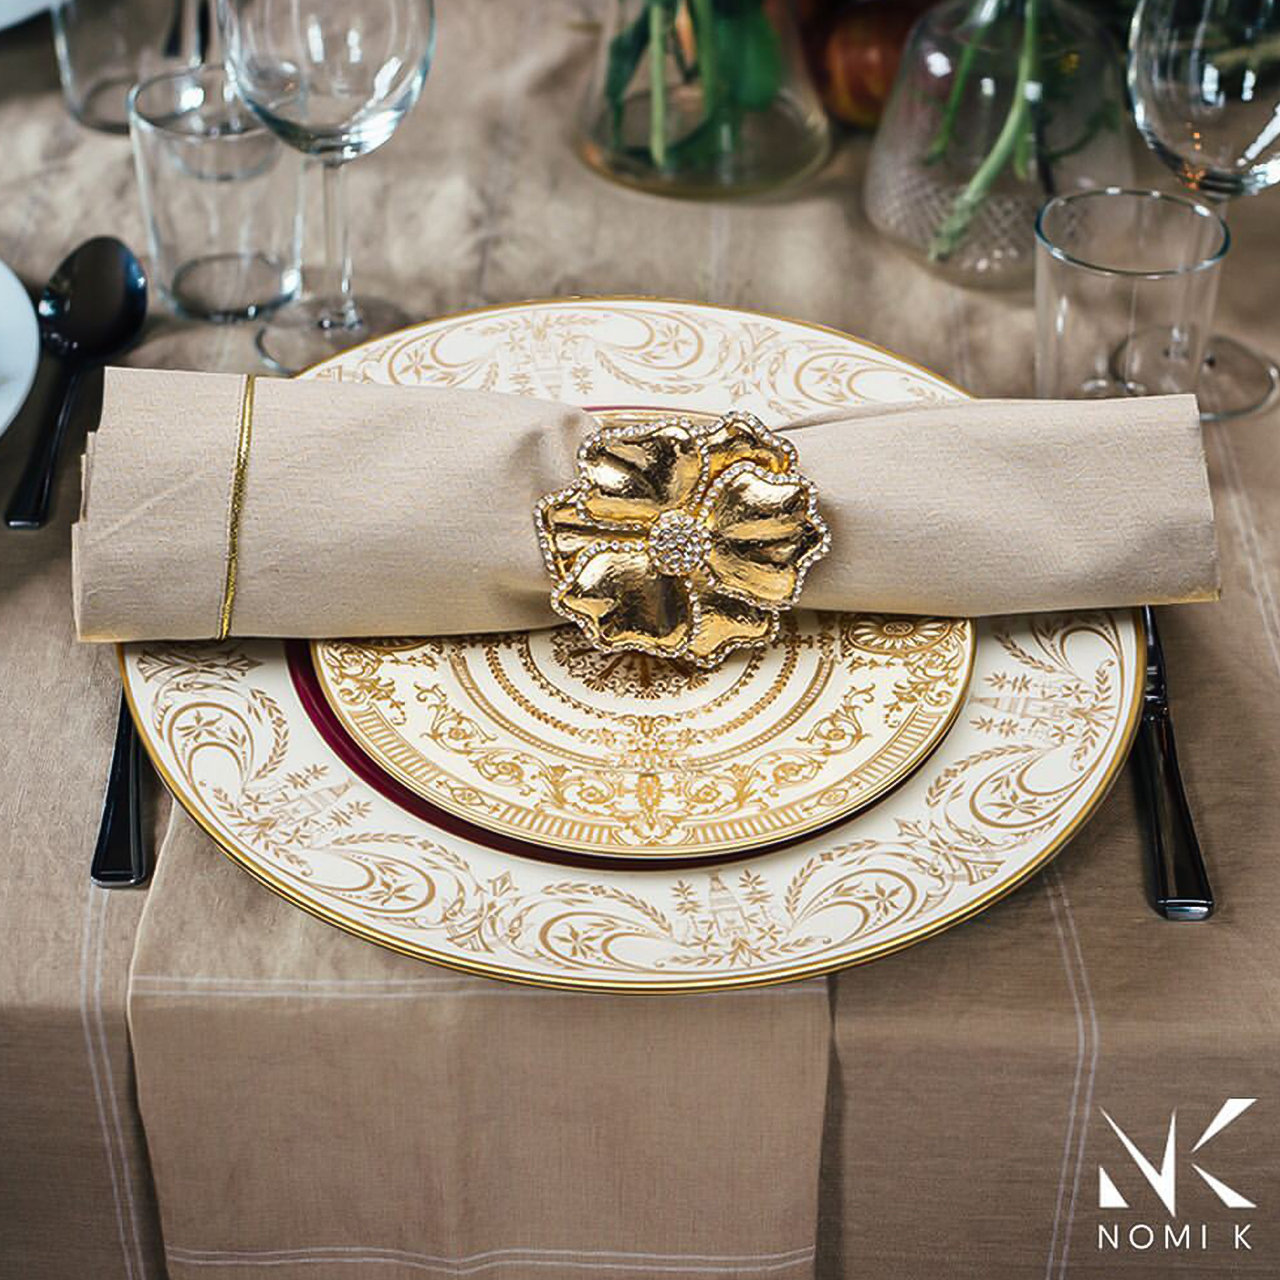 Elegant, gold accent tableware designs can transform your Thanksgiving meal into a luxurious experience